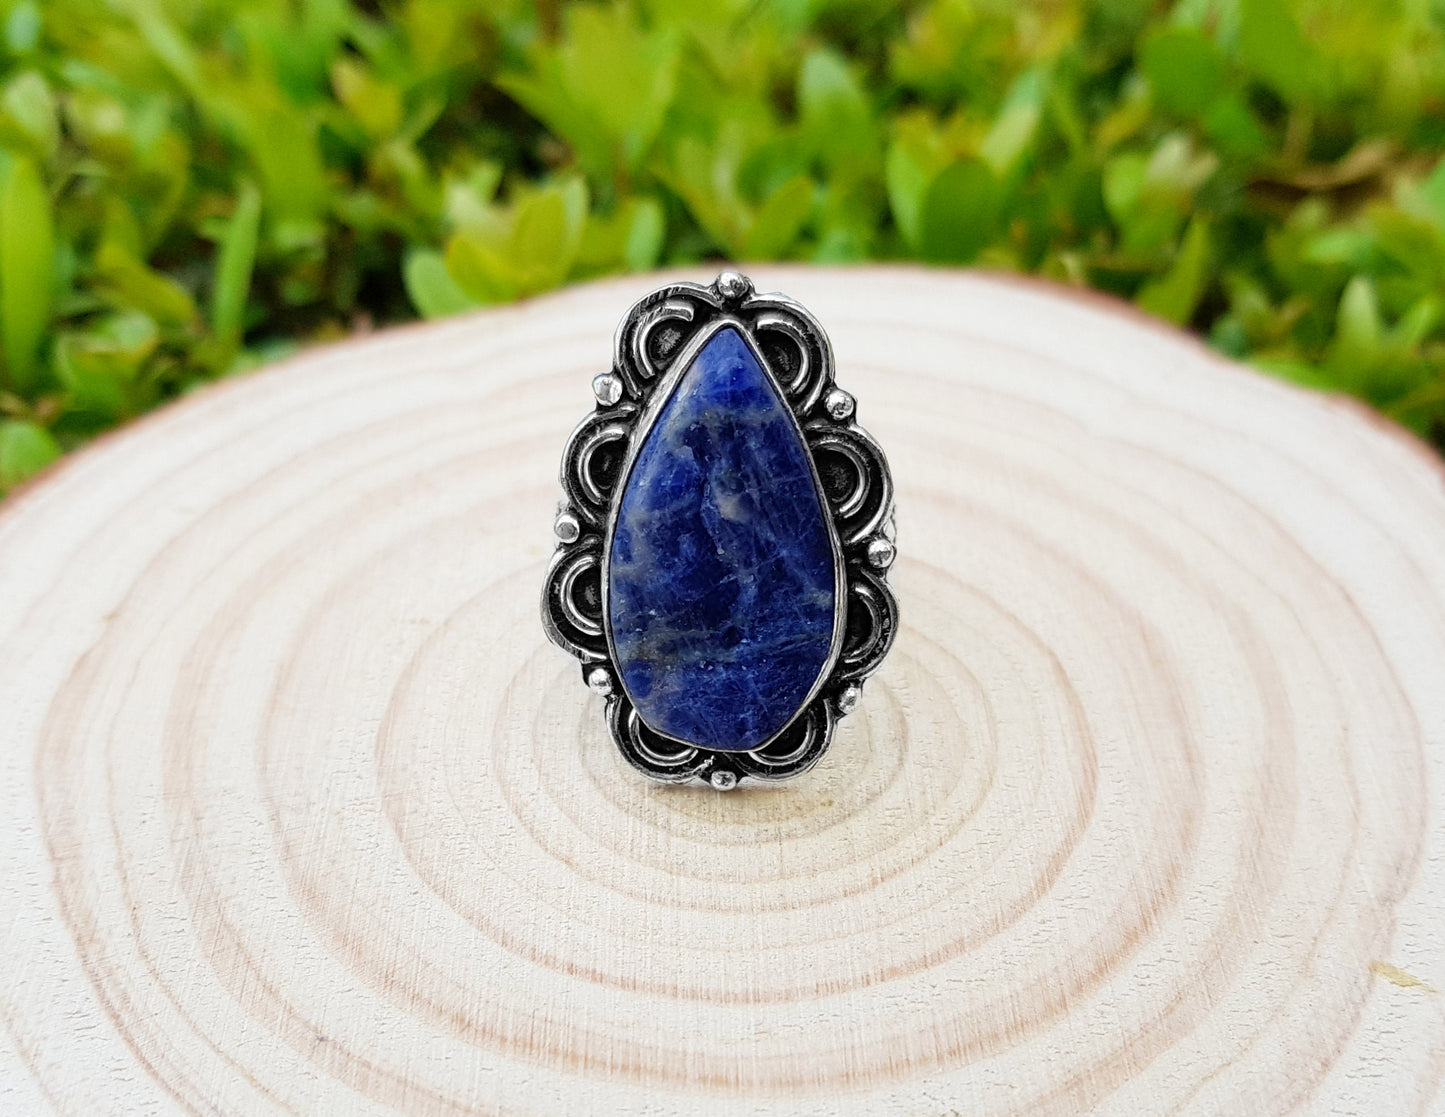 Raw Blue Sodalite Statement Ring Size US 8 1/2 Sterling Silver Gemstone Ring Boho Ring Unique Jewelry Ethnic Ring GypsyJewelry